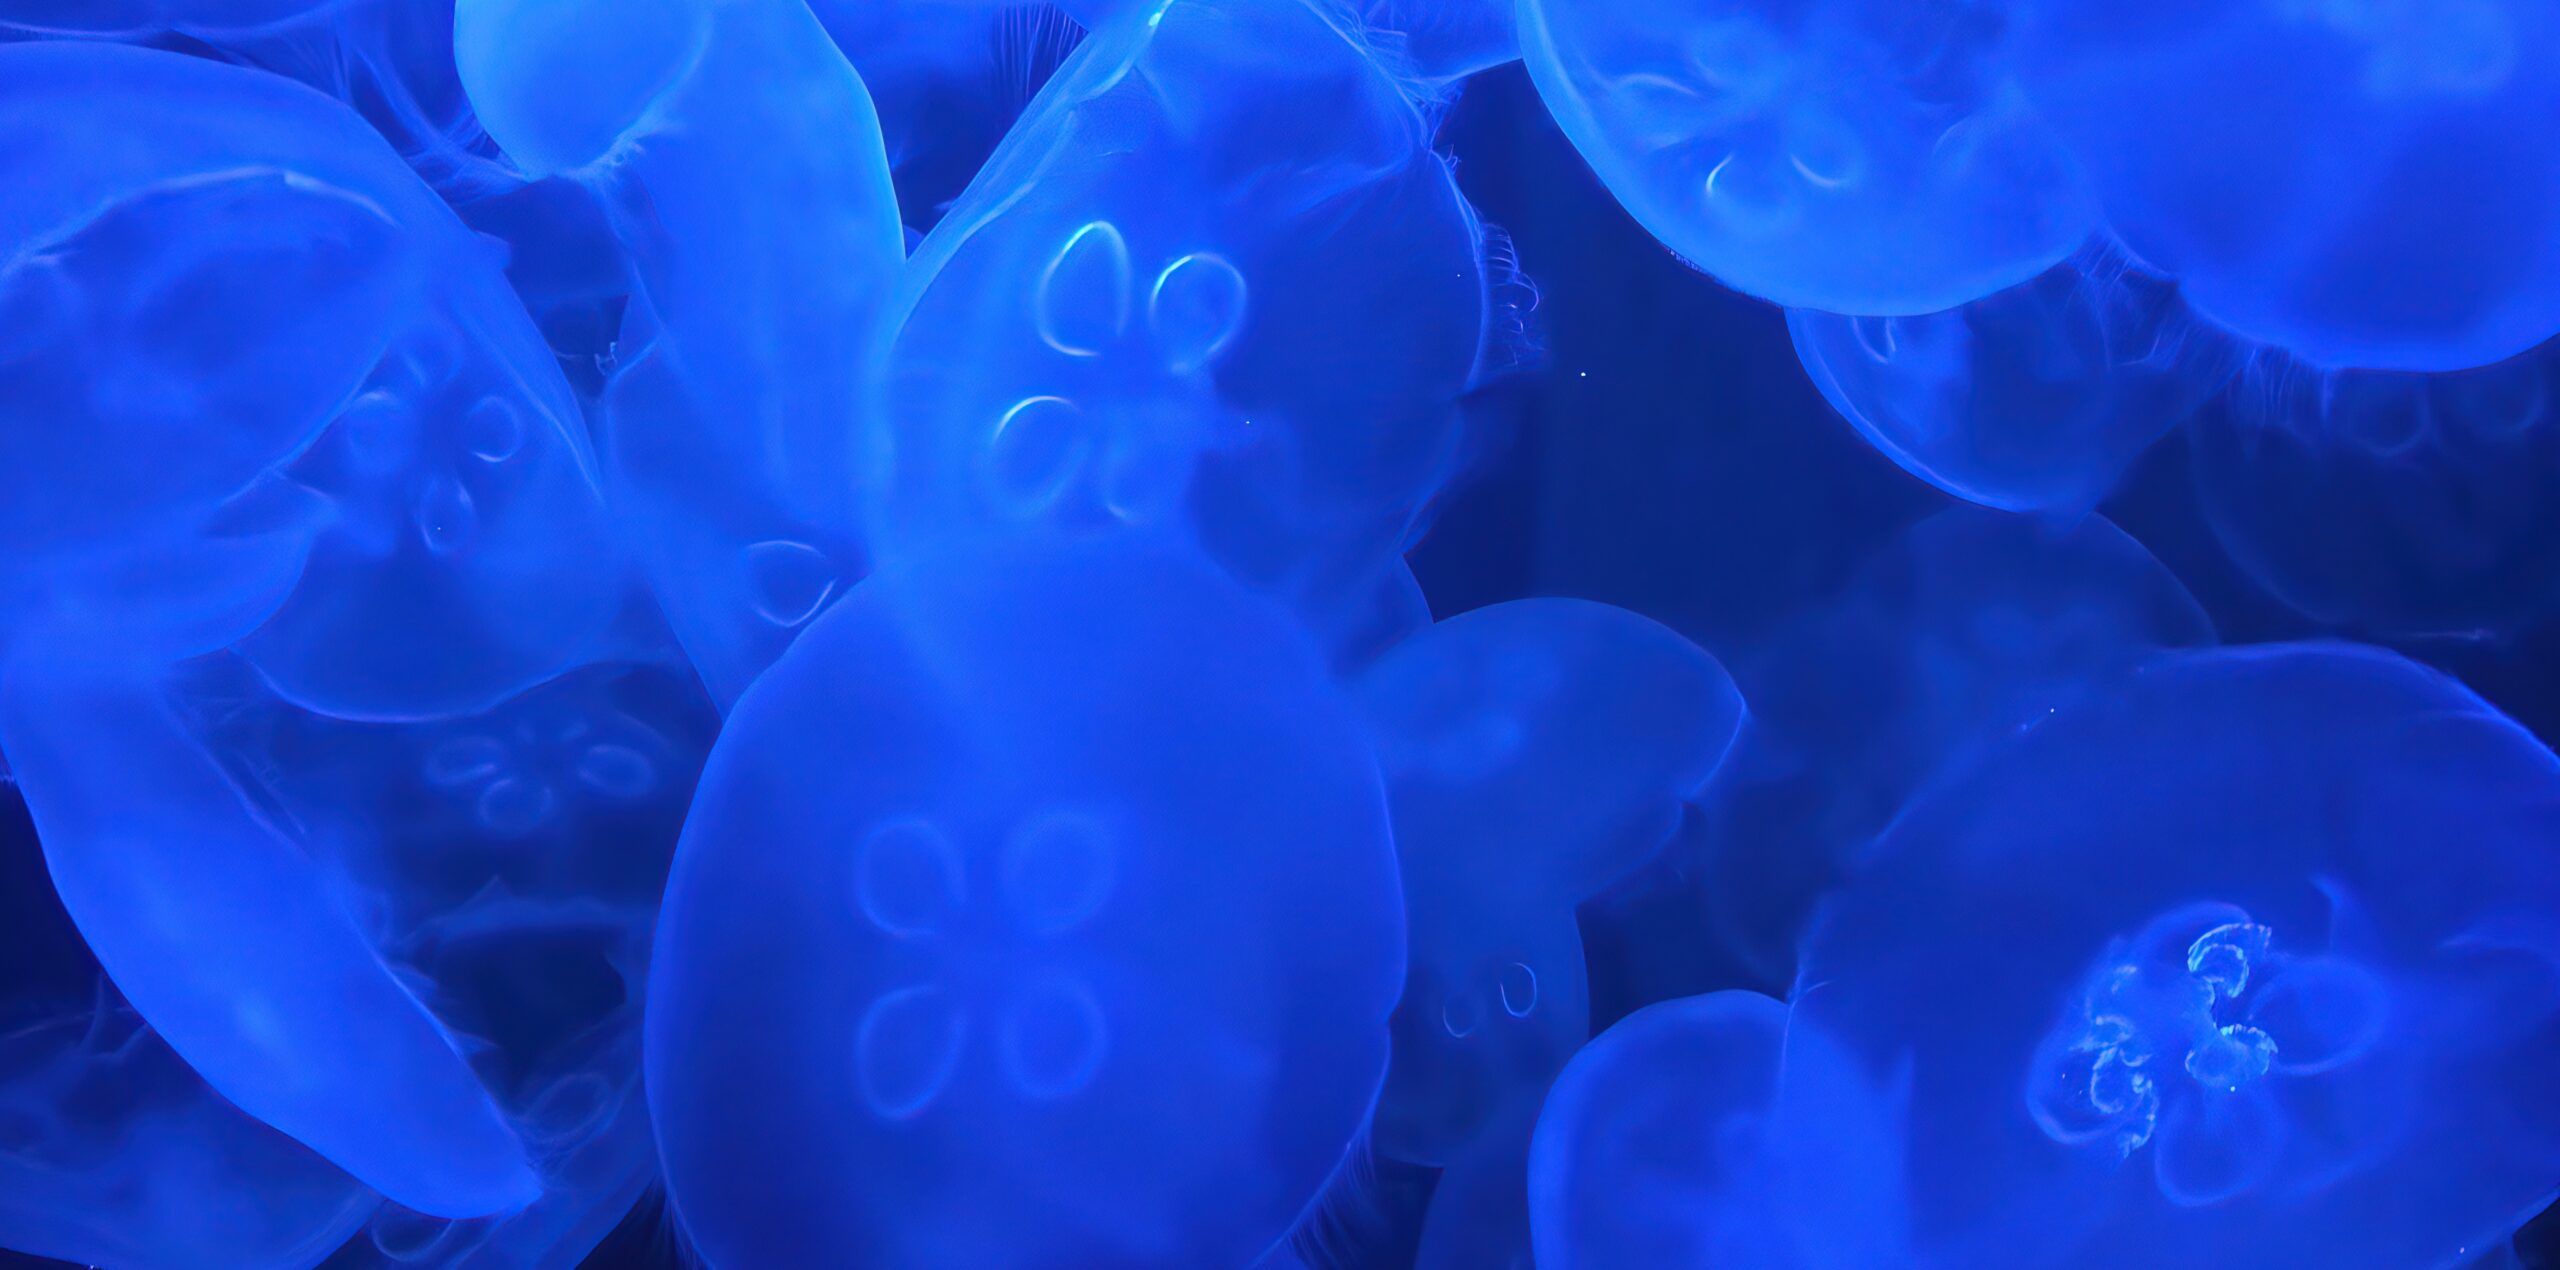 Jellyfish, jellies, medusae, quallen, and agua mala—regardless of what you call them, they instill fear and wonder in humans. They are slimy, cold, 